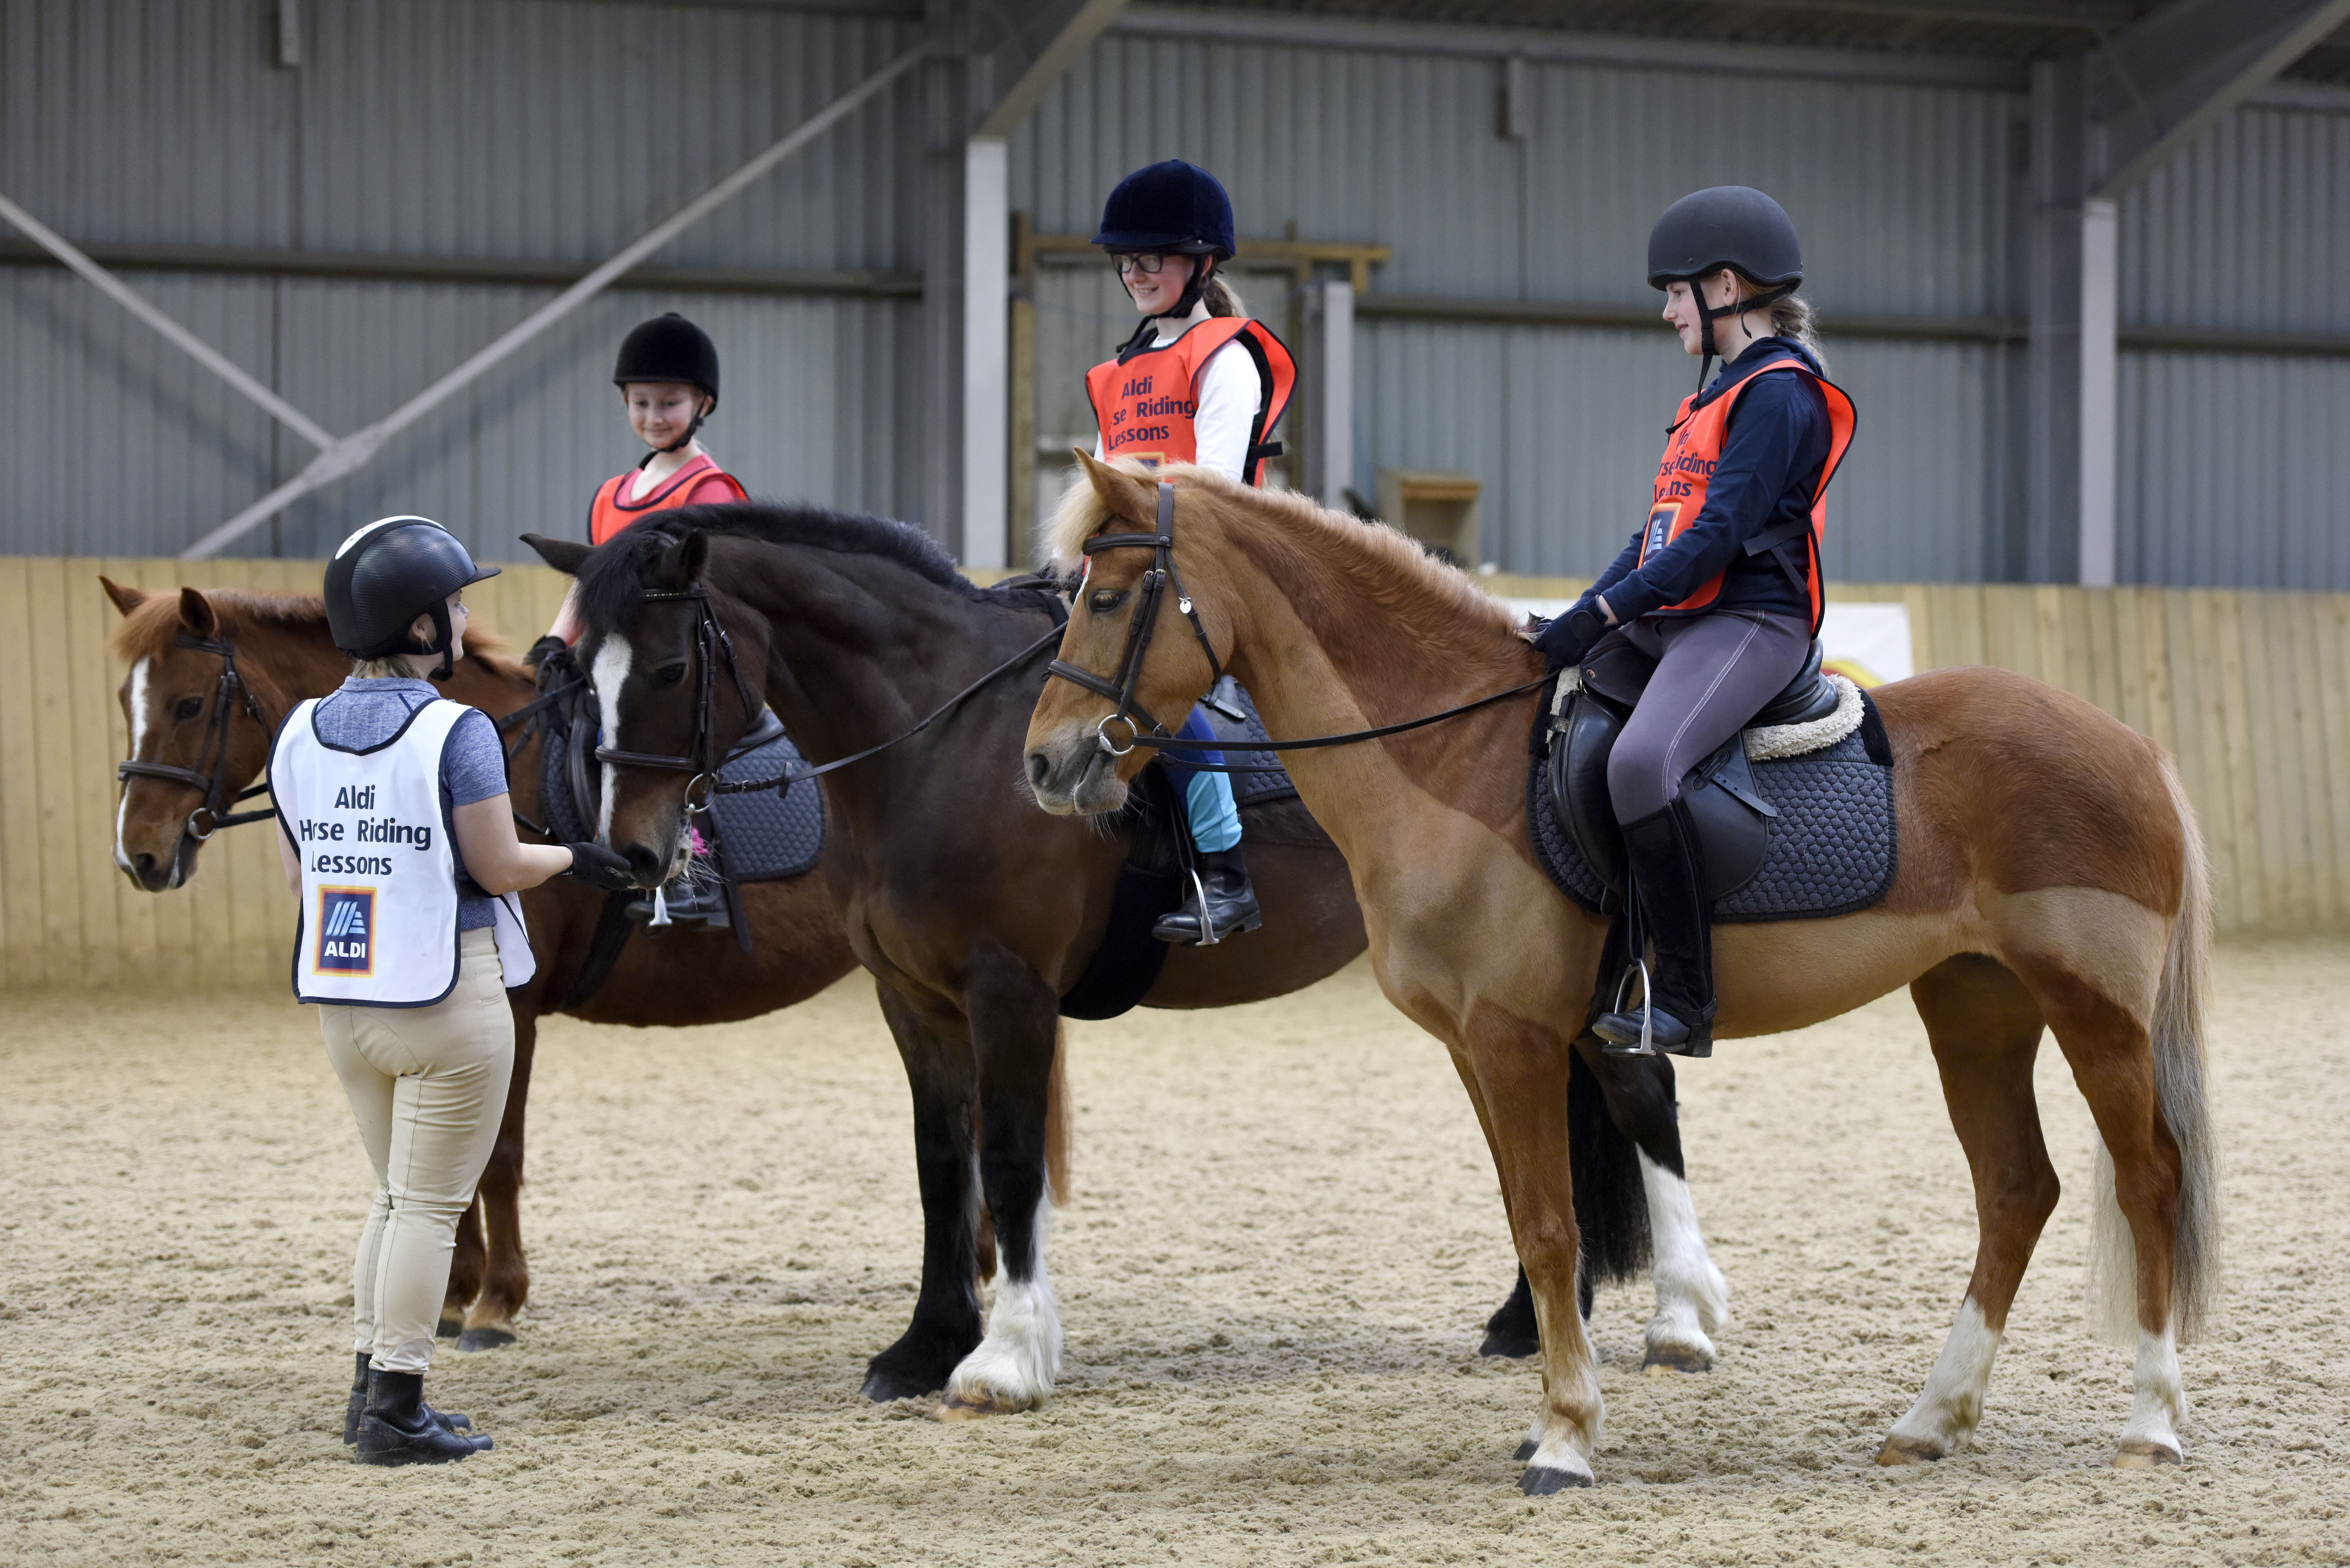 Aldi is set to launch Specialbuys Horse Riding Lessons, offering a 30% discount on standard prices for 30-minute private lessons, to encourage old and new riders to get into the saddle, particularly appealing to parents who have been unable to introduce their kids to the sport due to expense.